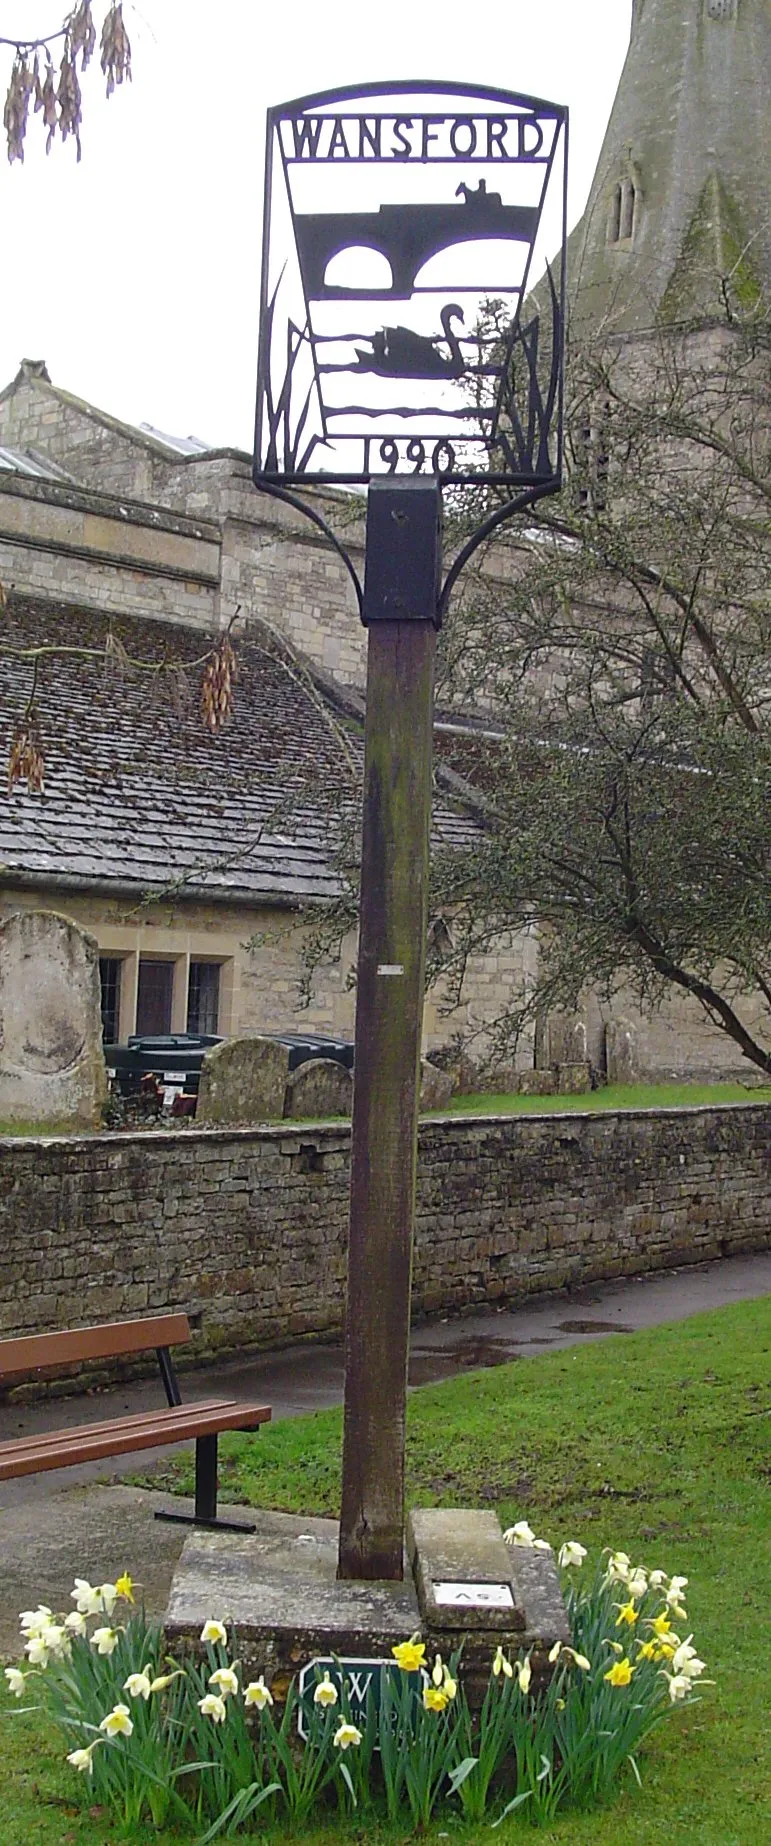 Photo showing: Signpost in Wansford, Cambridgeshire